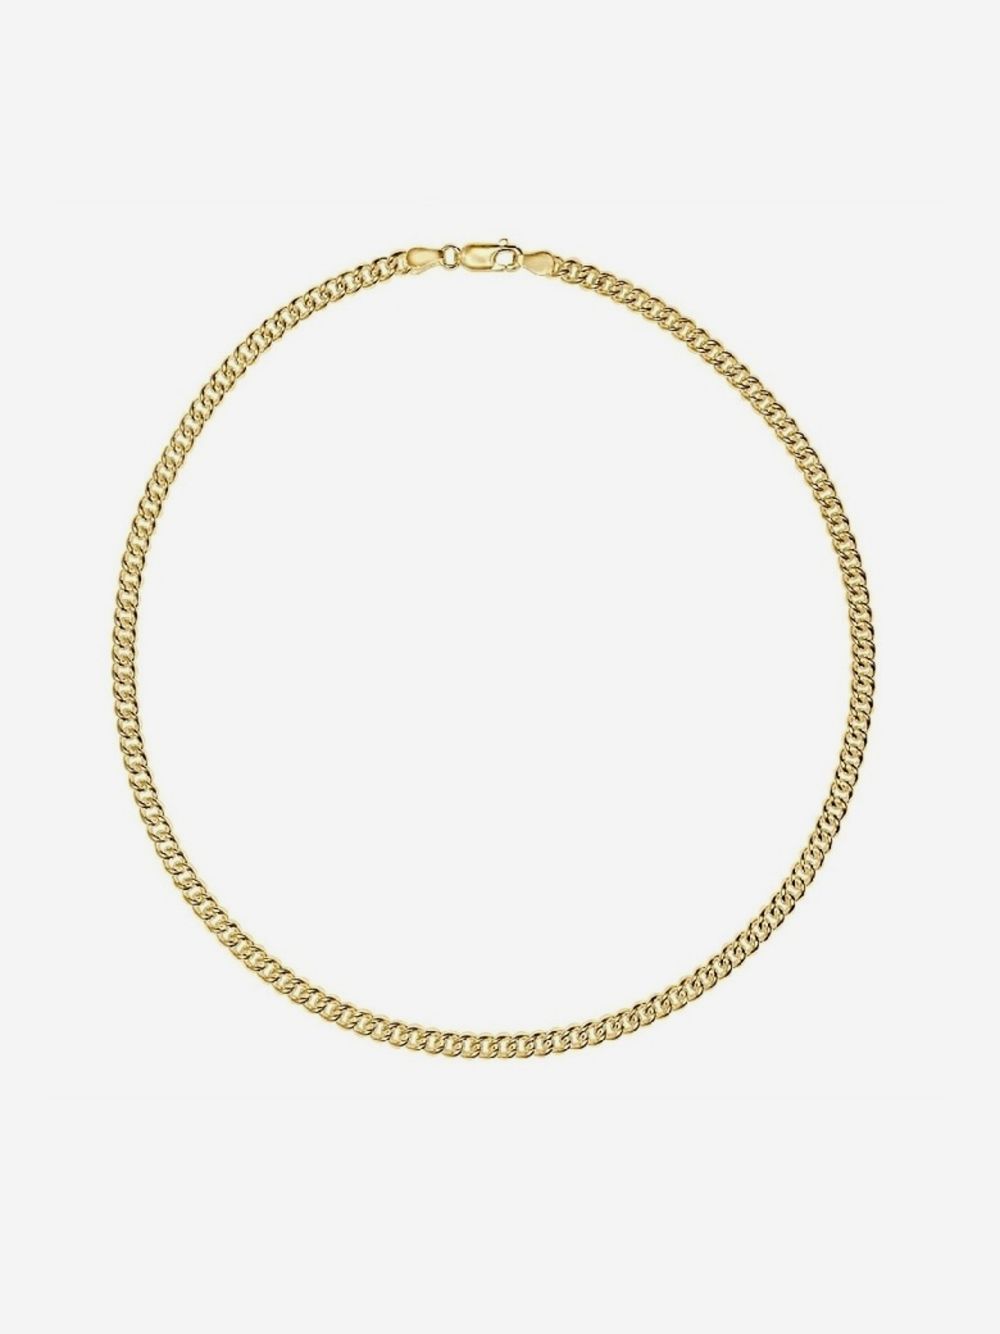 Gold Courage Necklace